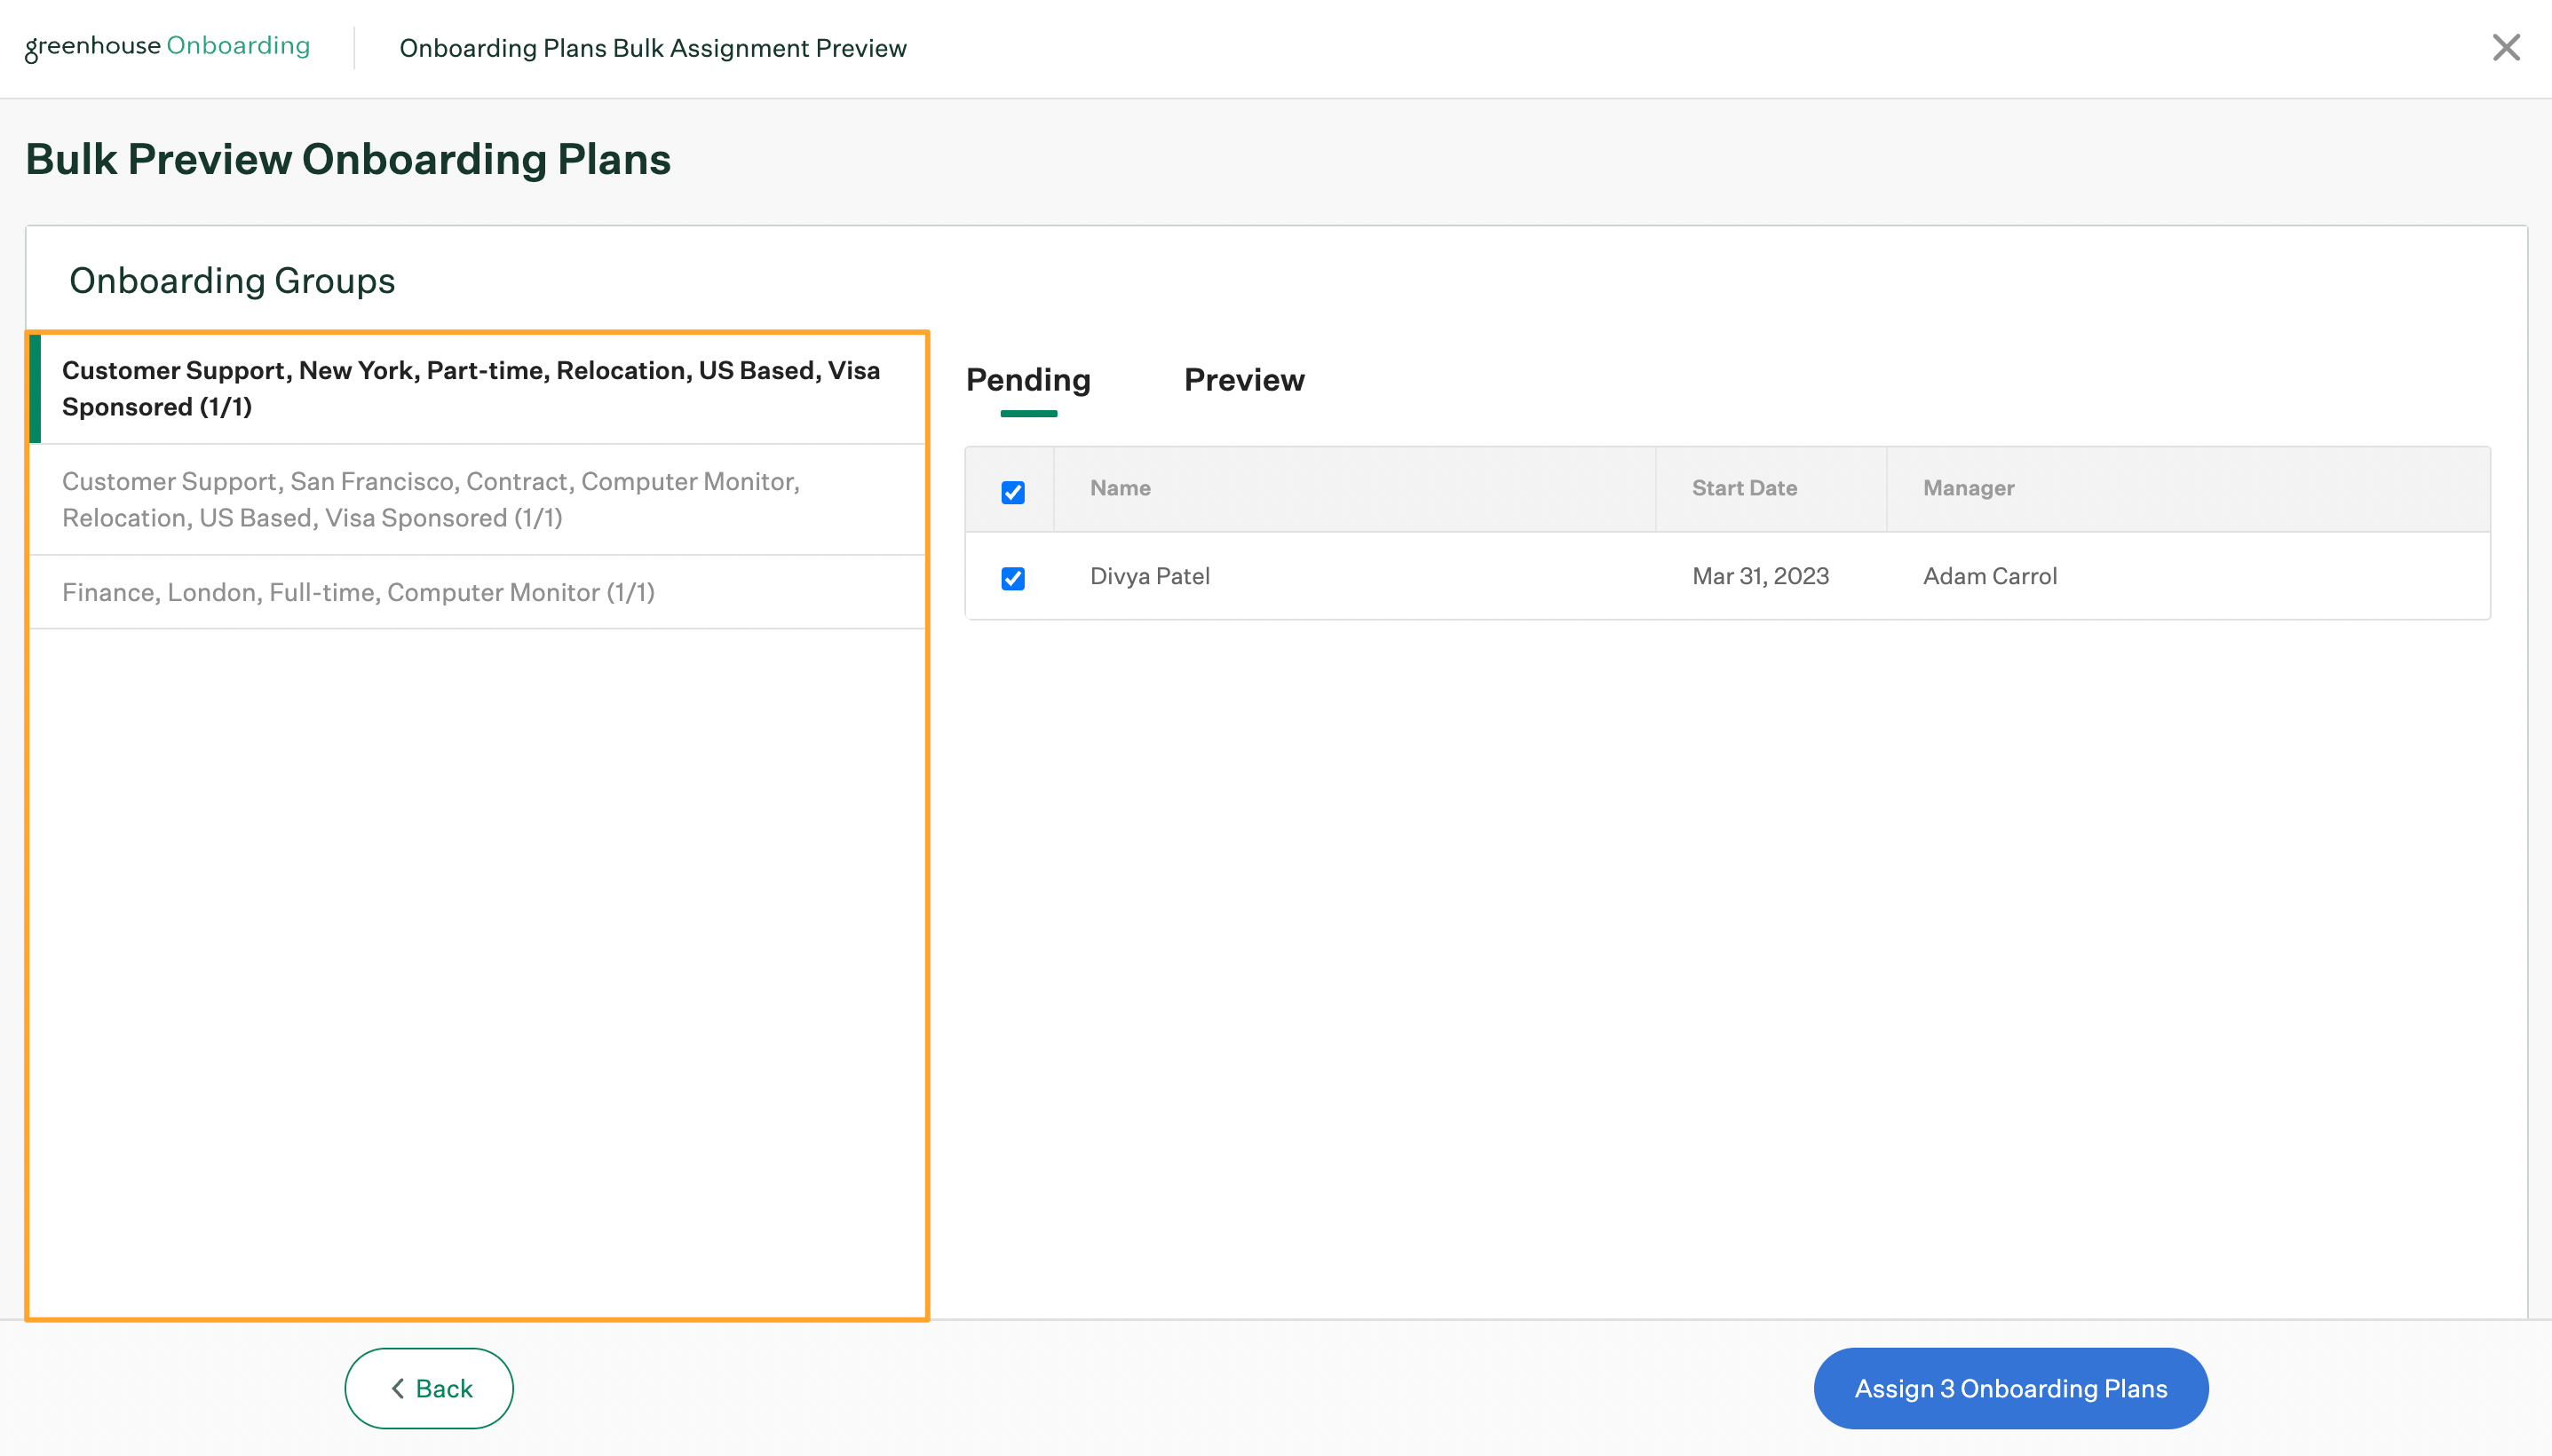 Bulk preview onboarding plans page with onboarding groups panel highlighted